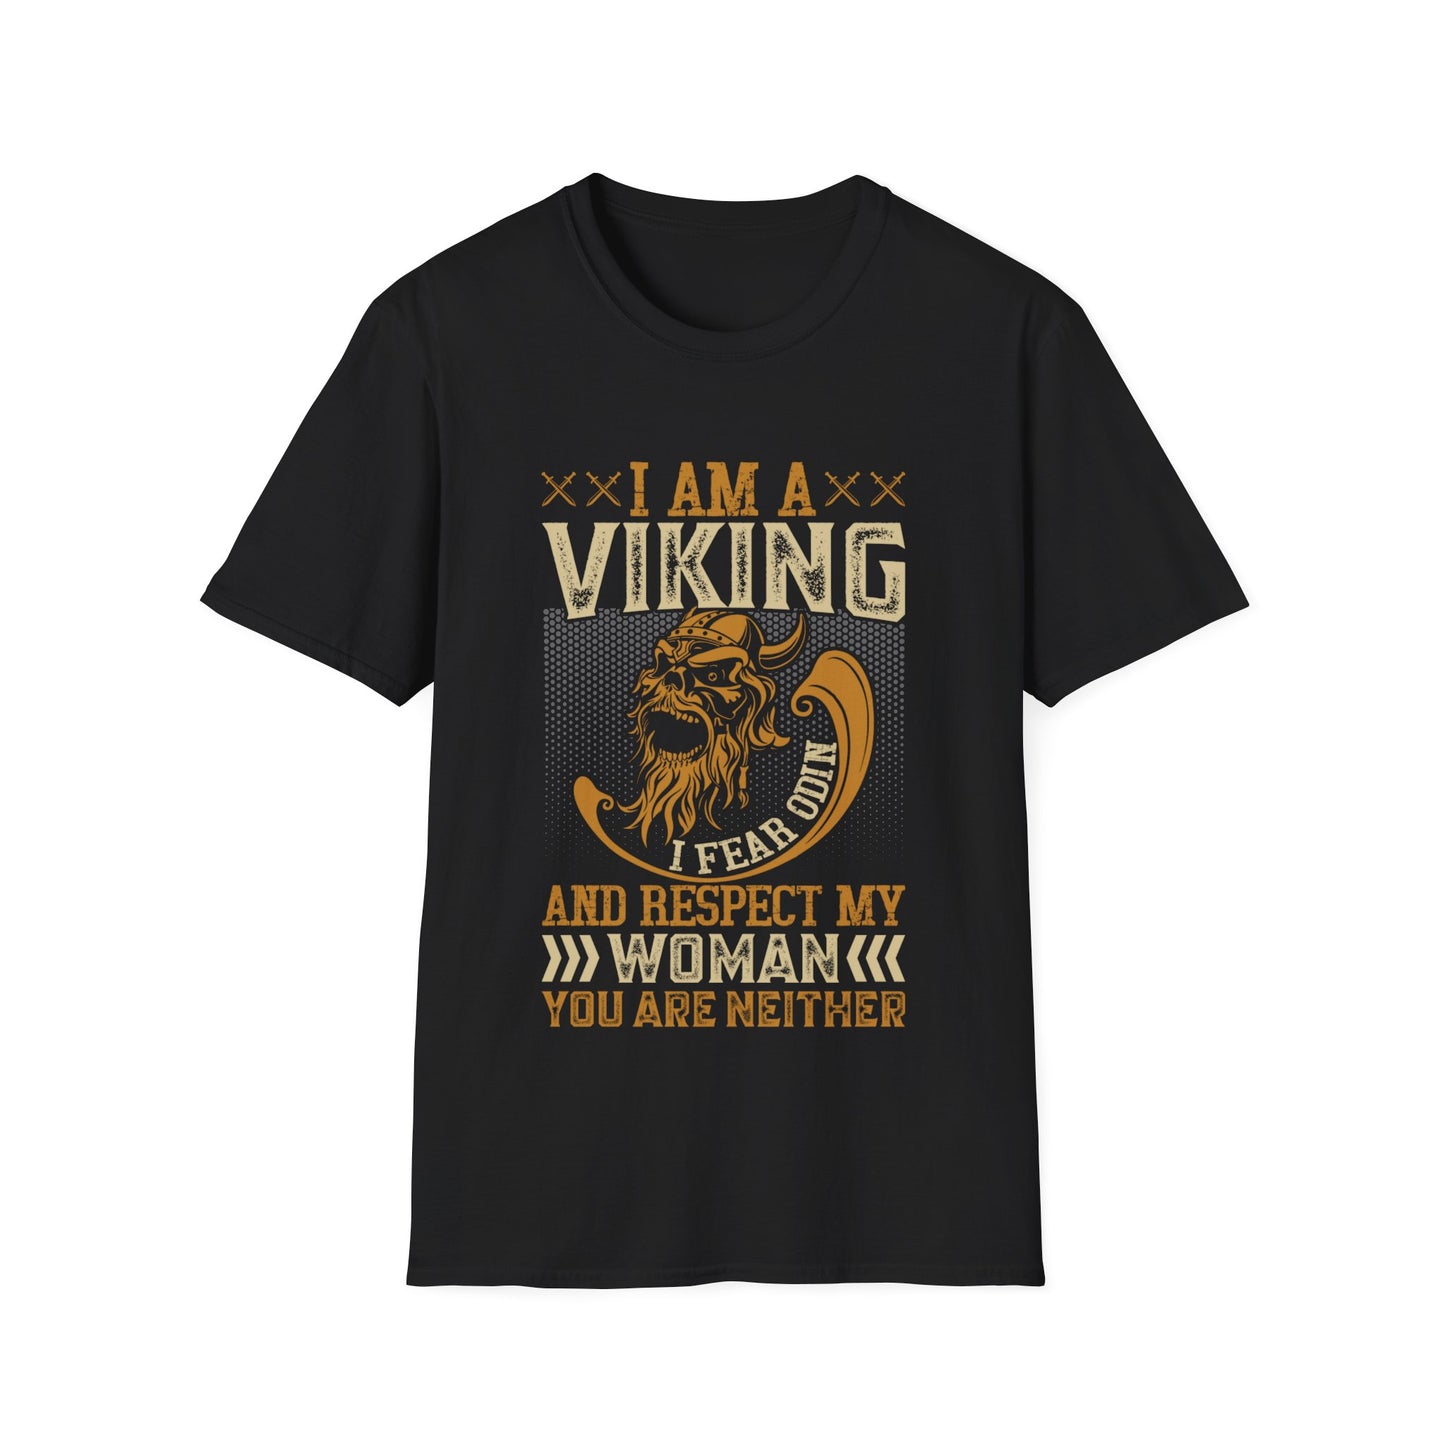 I Am A Viking I Fear Odin And Respect My Woman You Are Neither T-Shirt